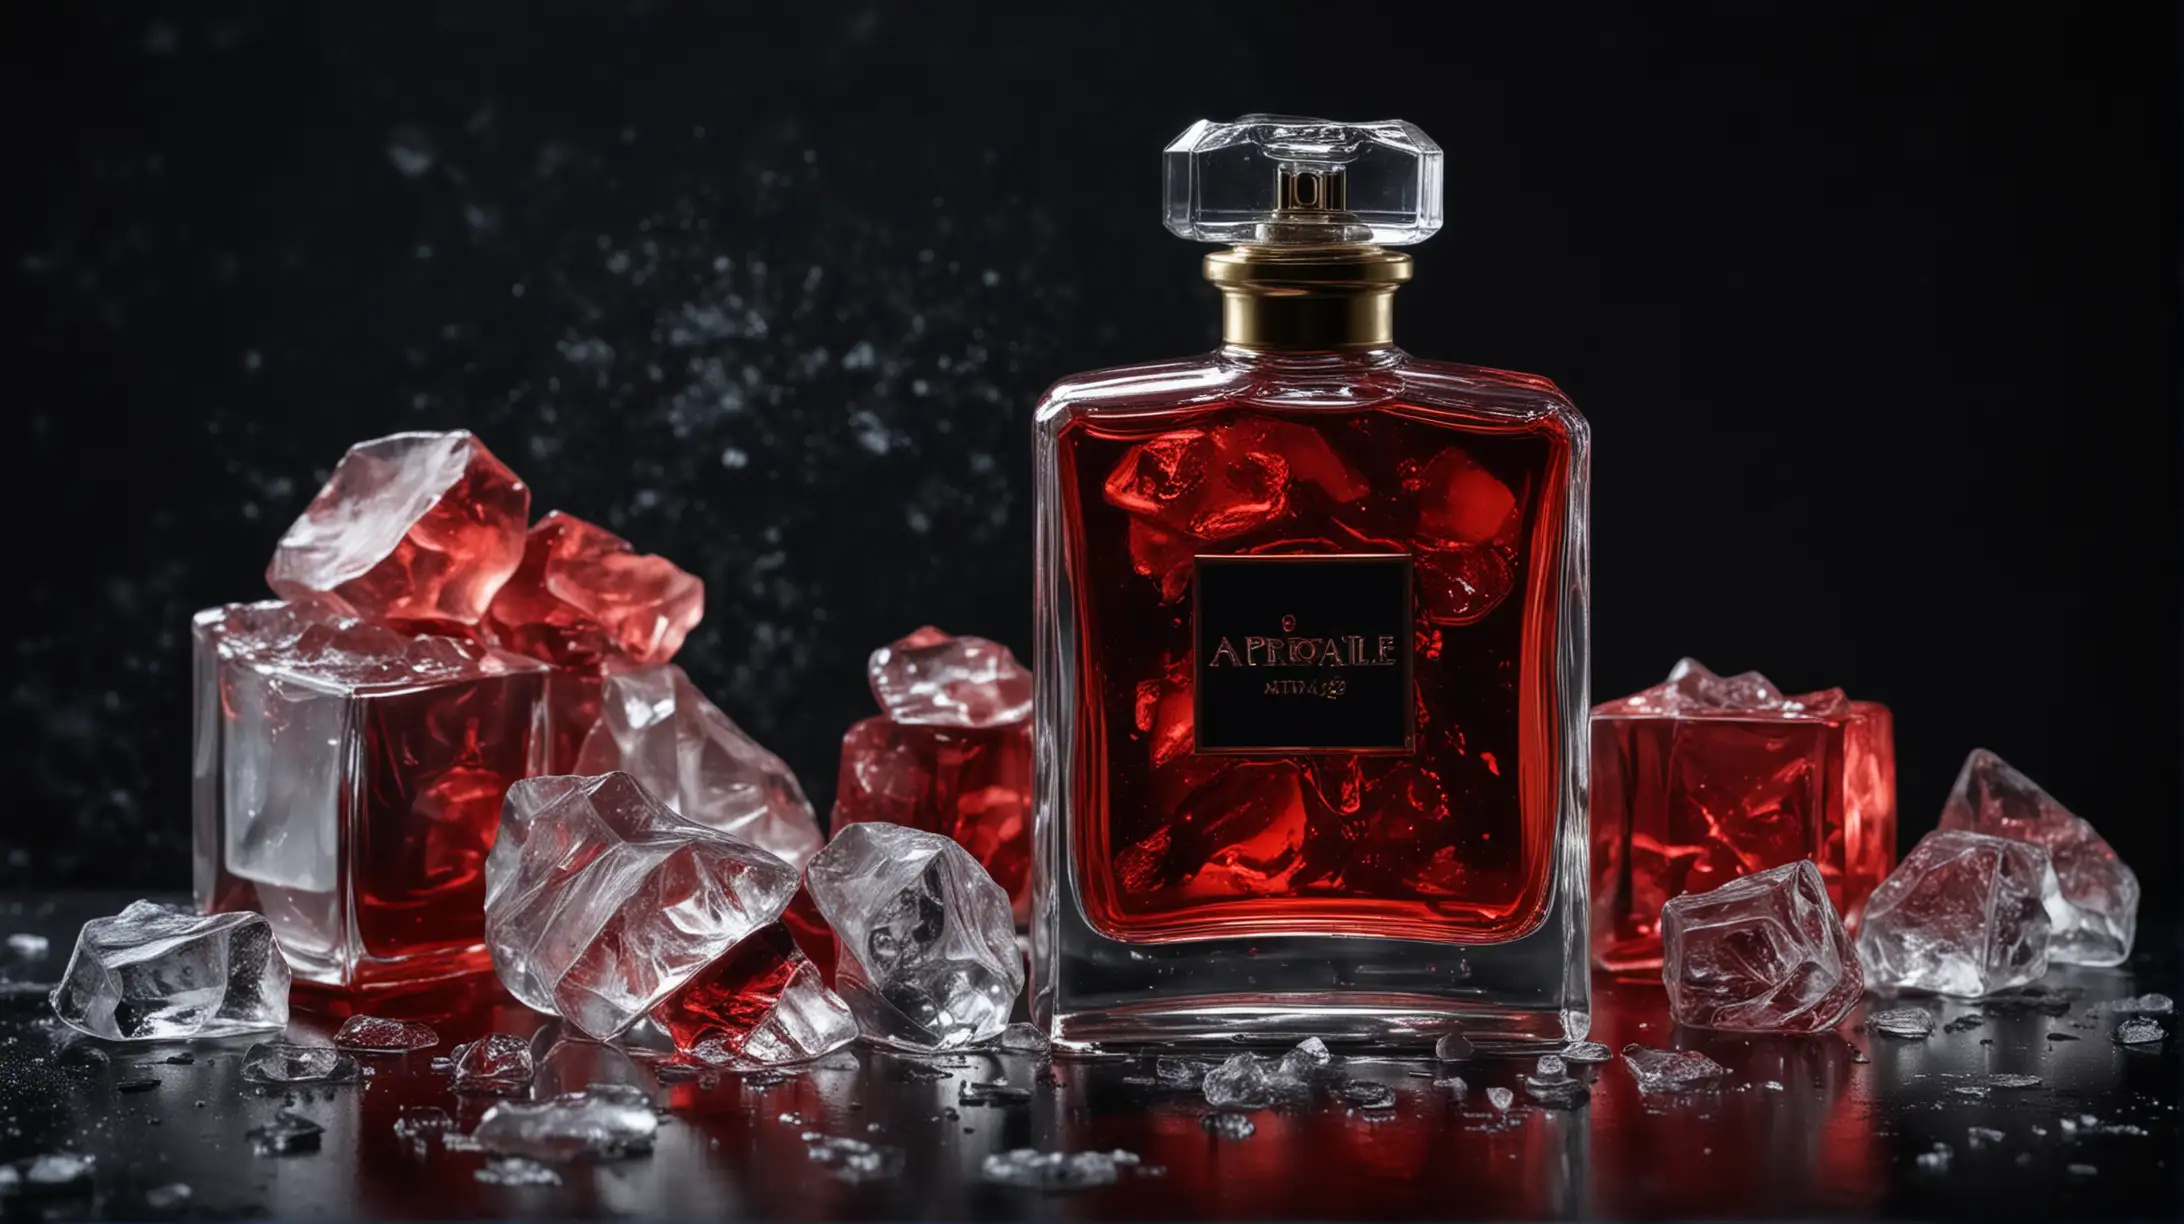 still life picture of full perfume bottle and some clear ice objects, dark image, fluid in the botthe is red